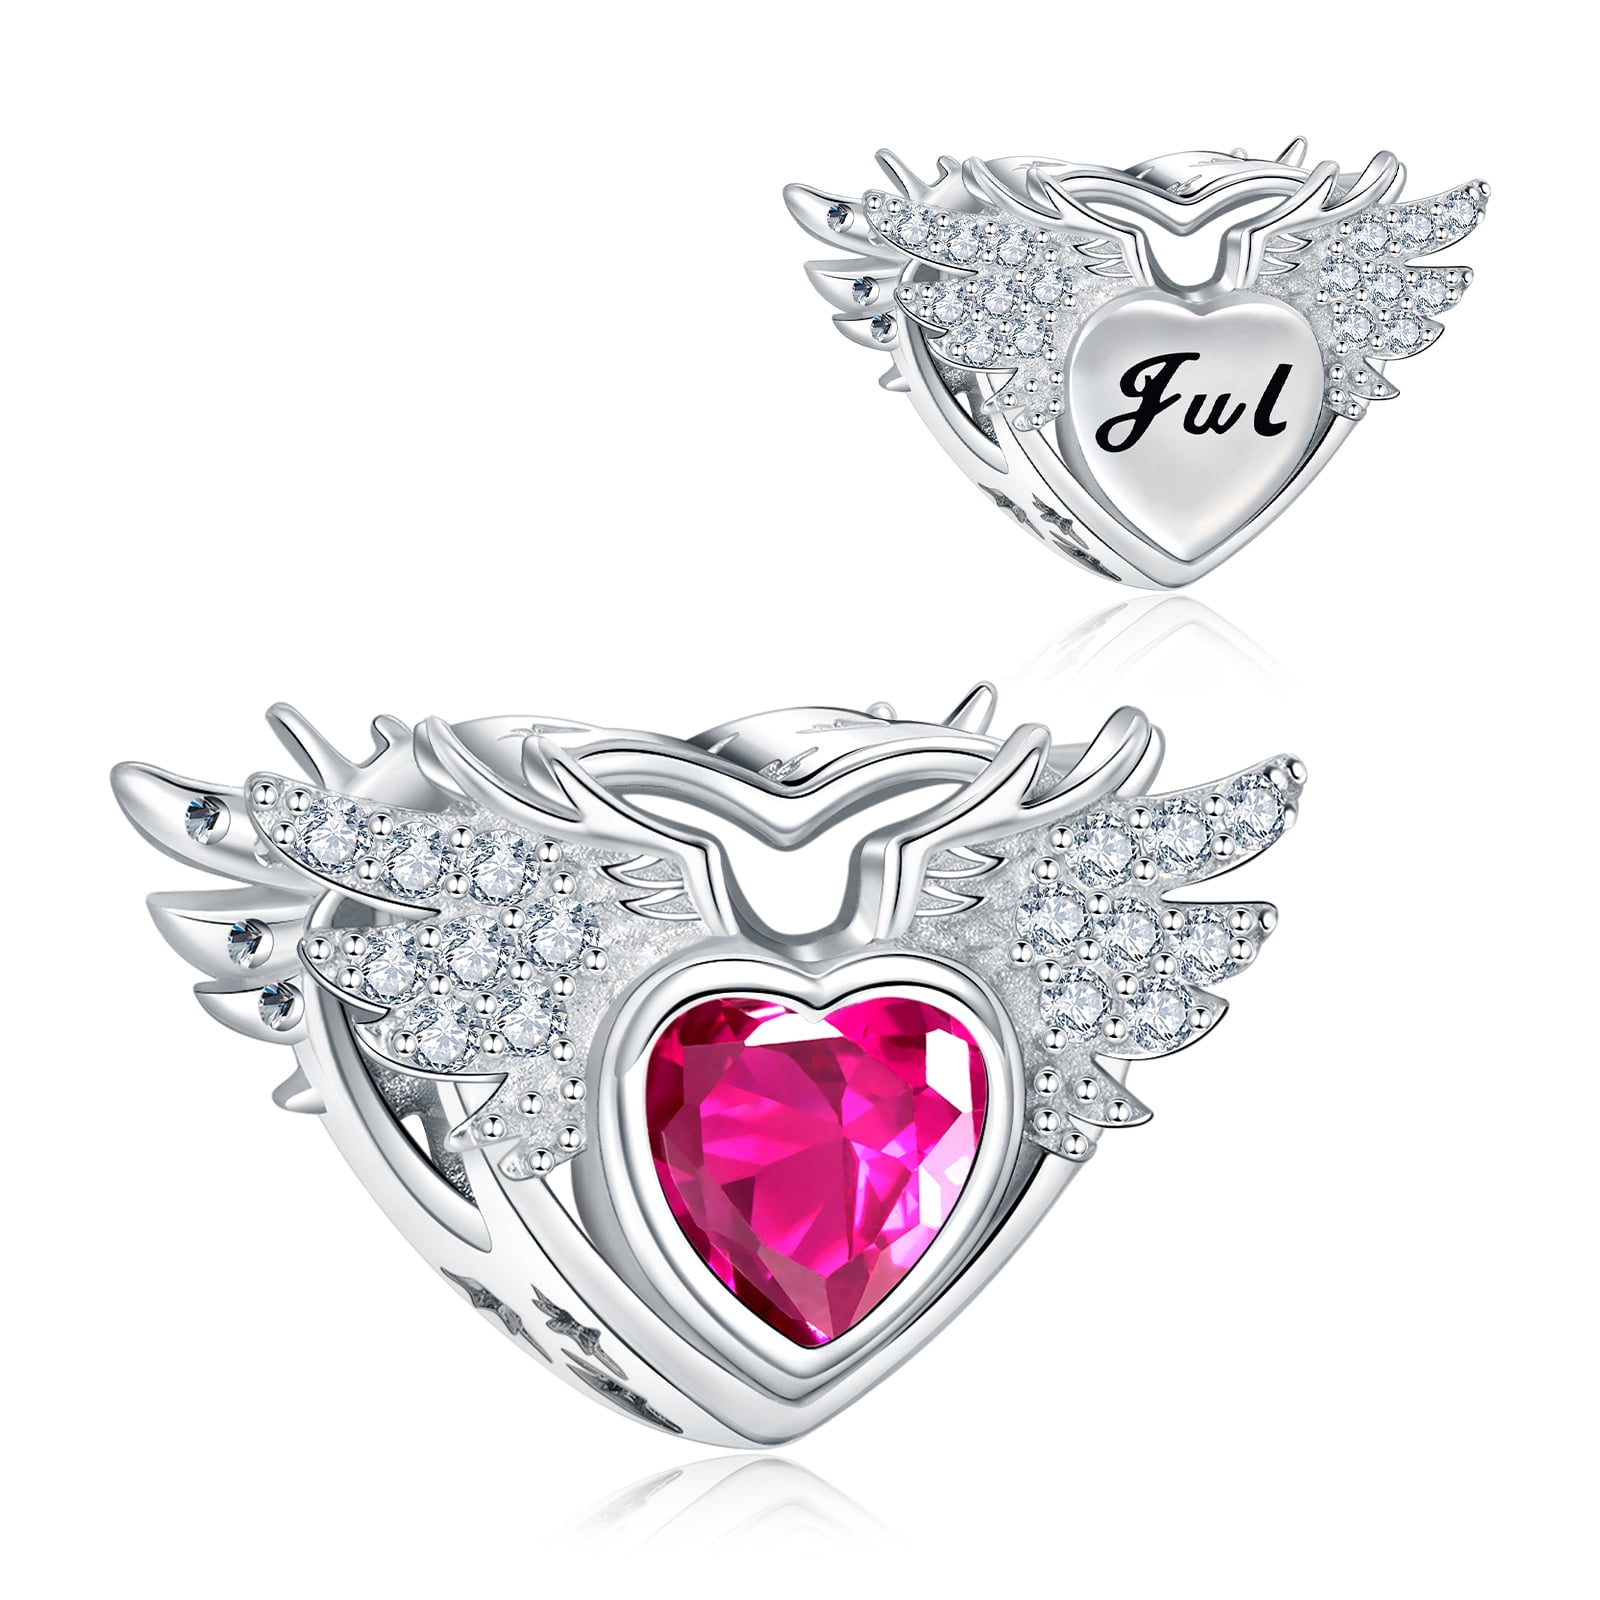 CandyCharms Angel Holding Heart Dangle Charms Beads For Bracelets